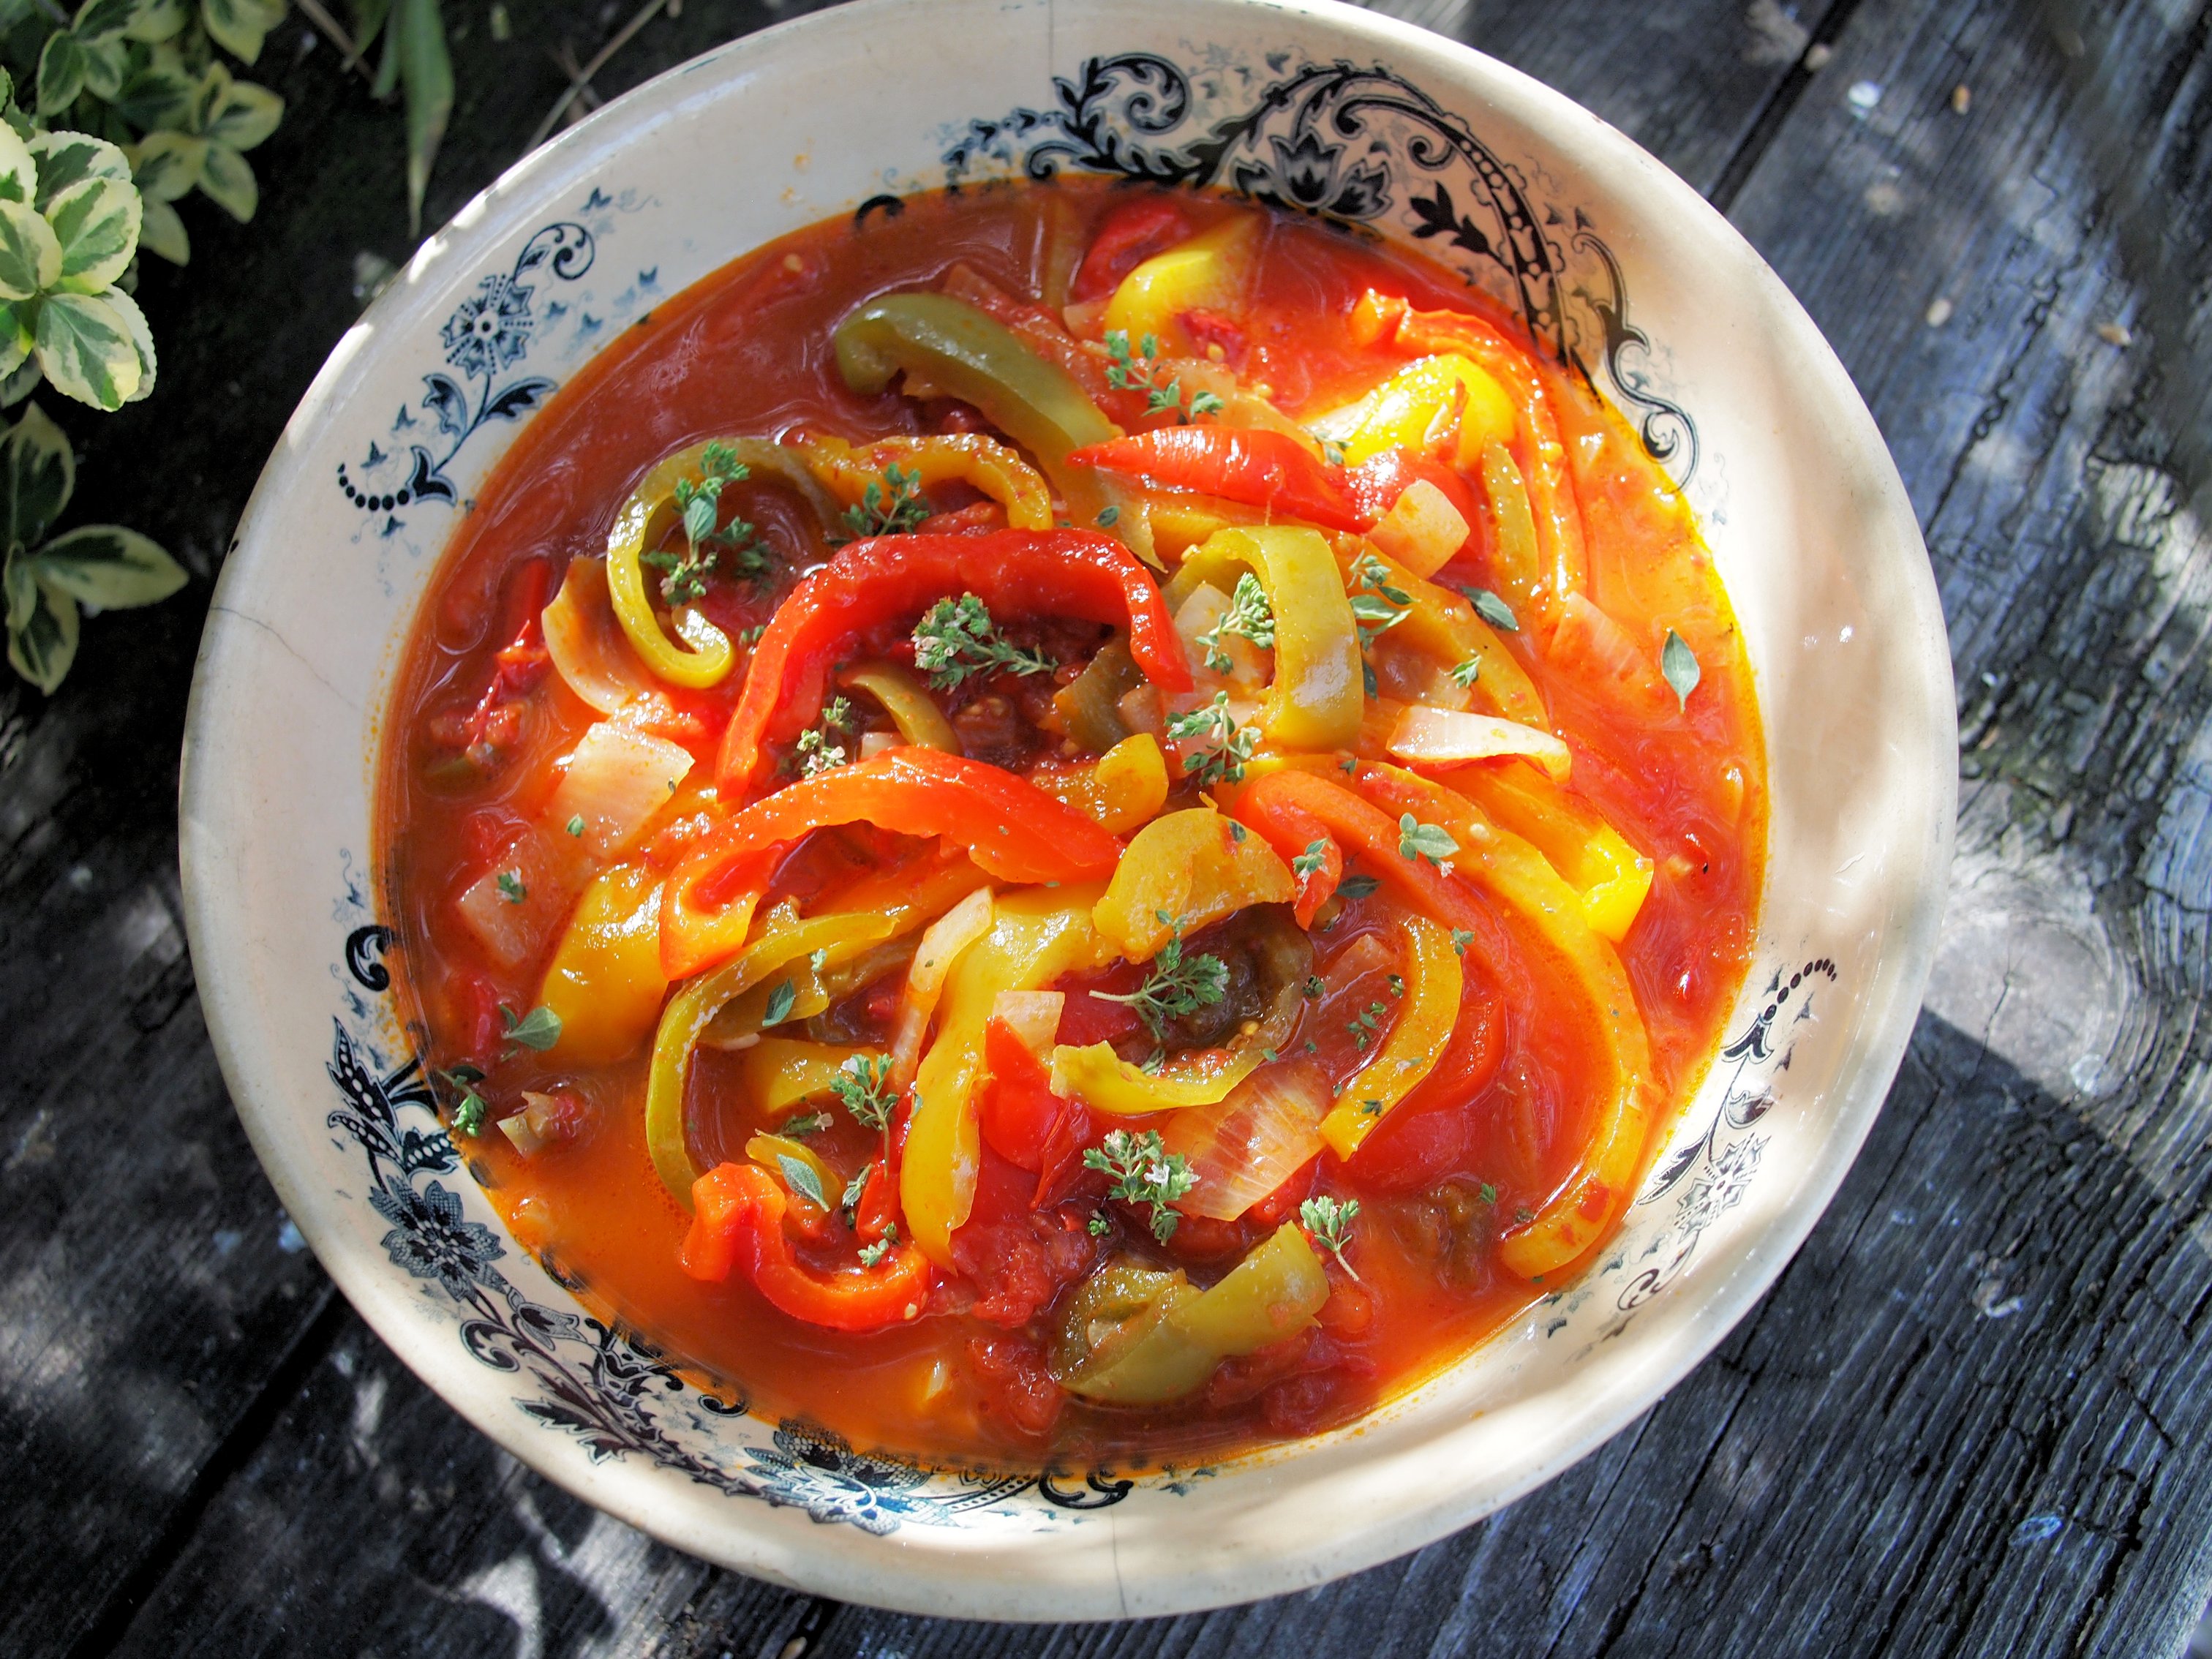 La Peperonata - Bell Peppers in Tomato Sauce - Inside The Rustic Kitchen